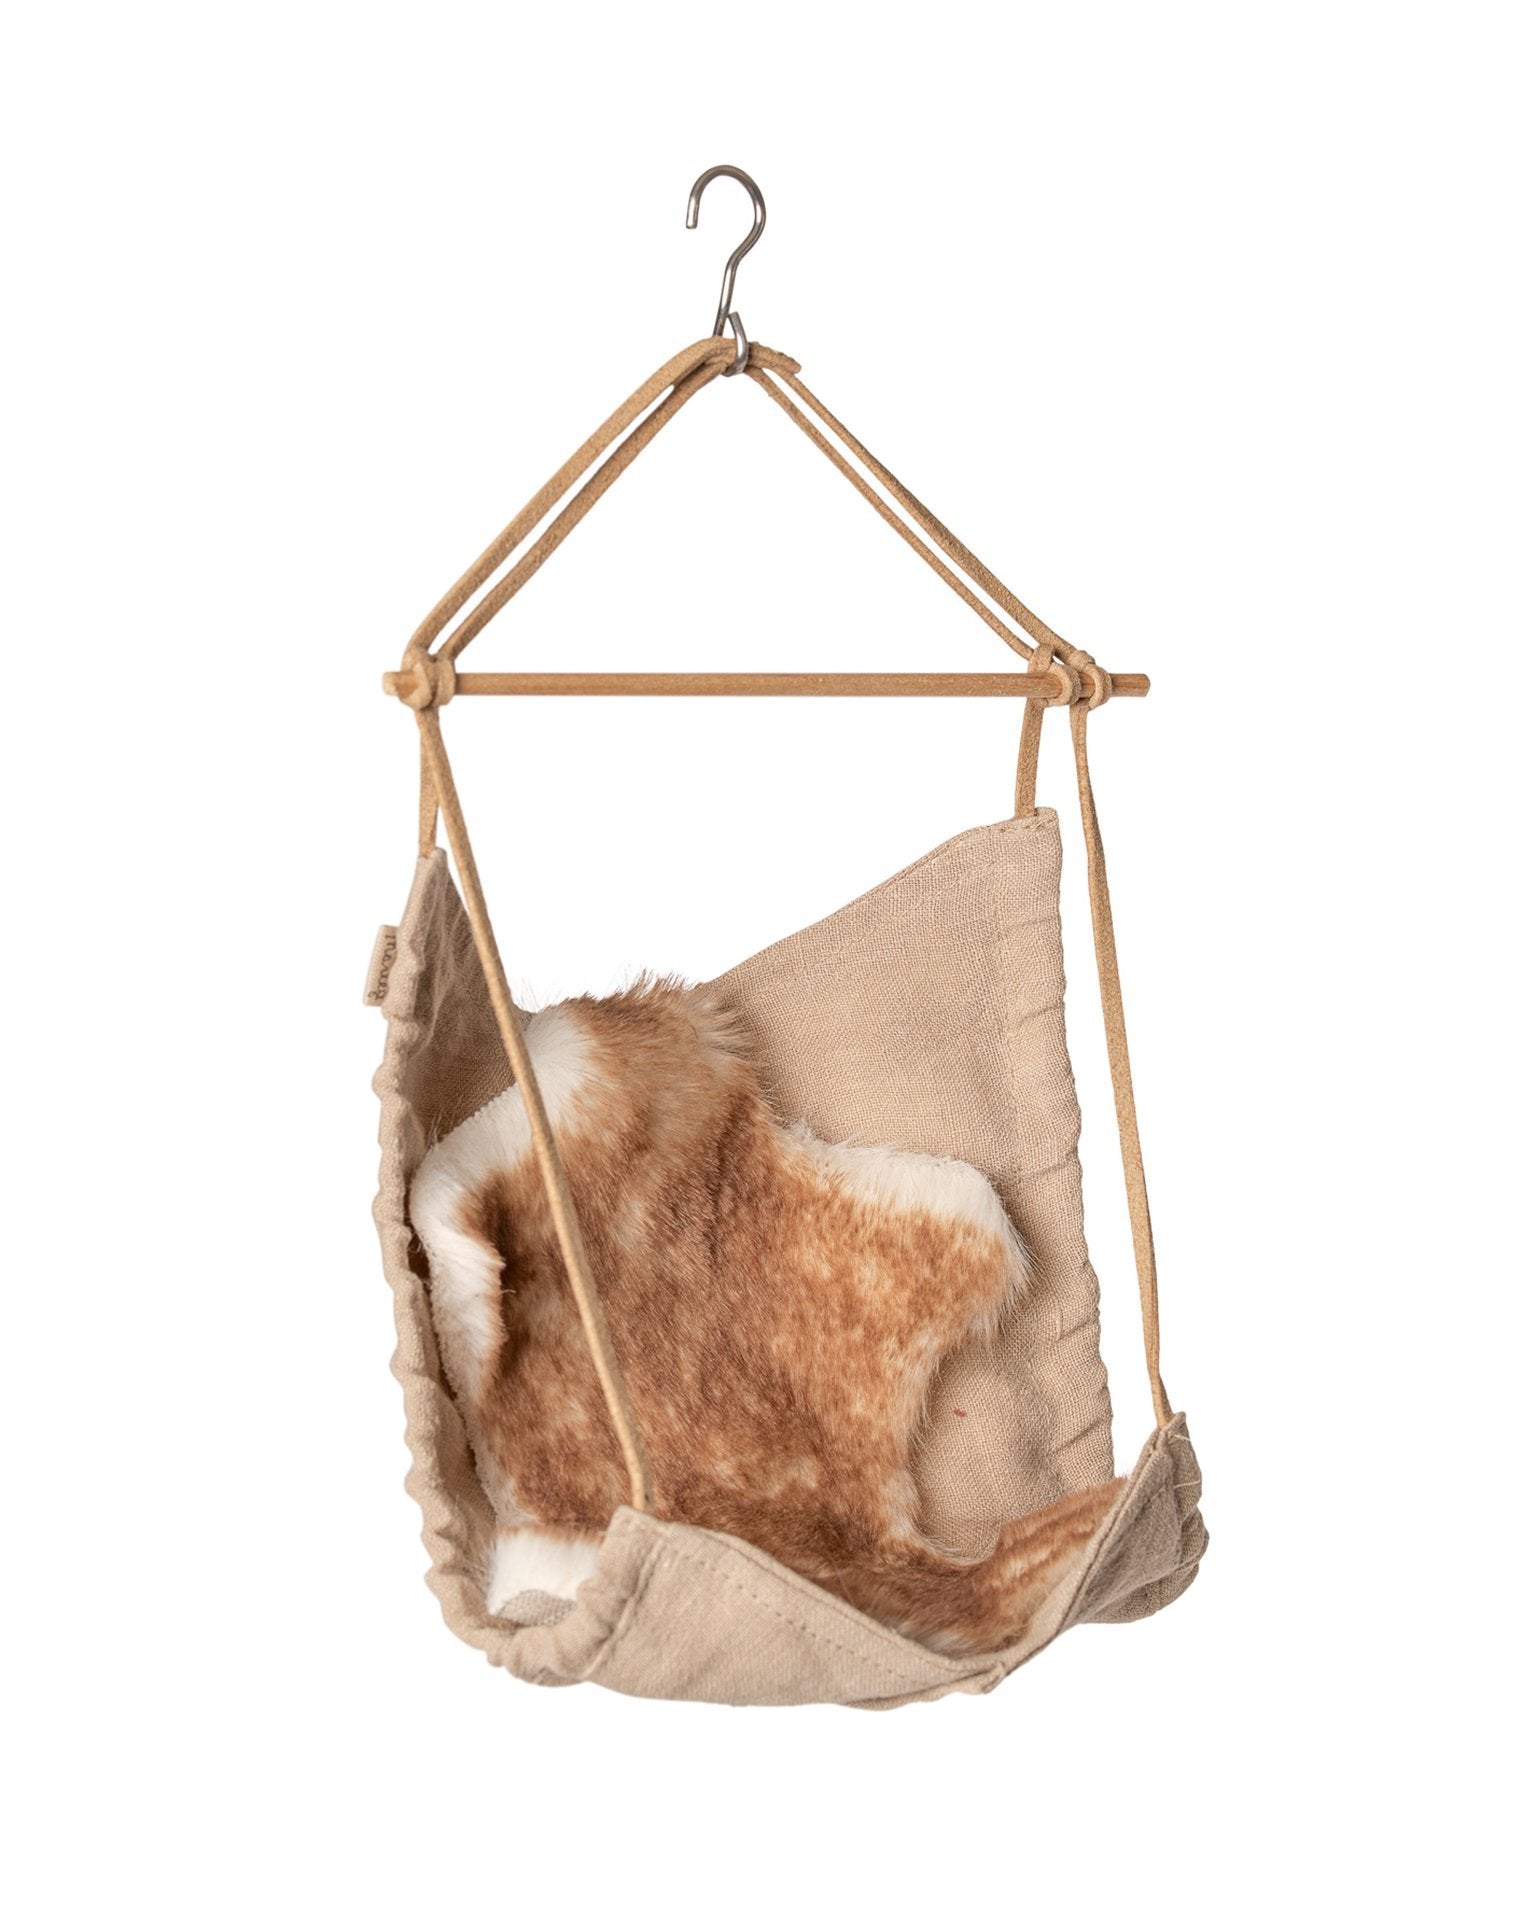 Little maileg play micro hanging chair